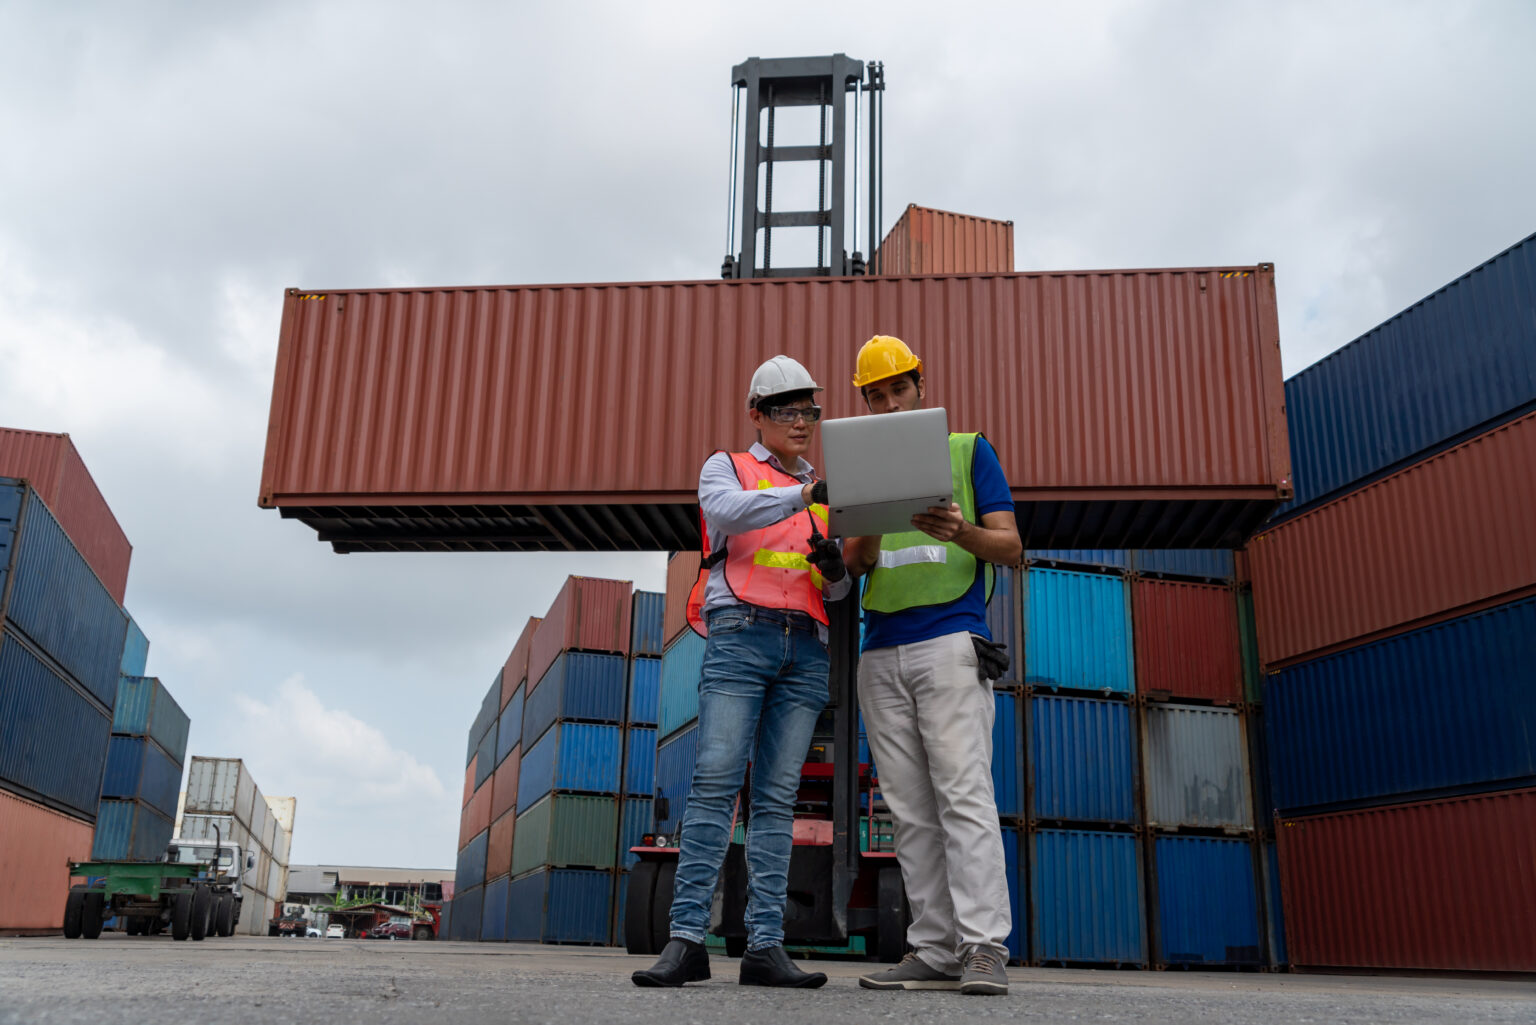 Industrial worker works with co-worker at overseas shipping container yard . Logistics supply chain management and international goods export concept .